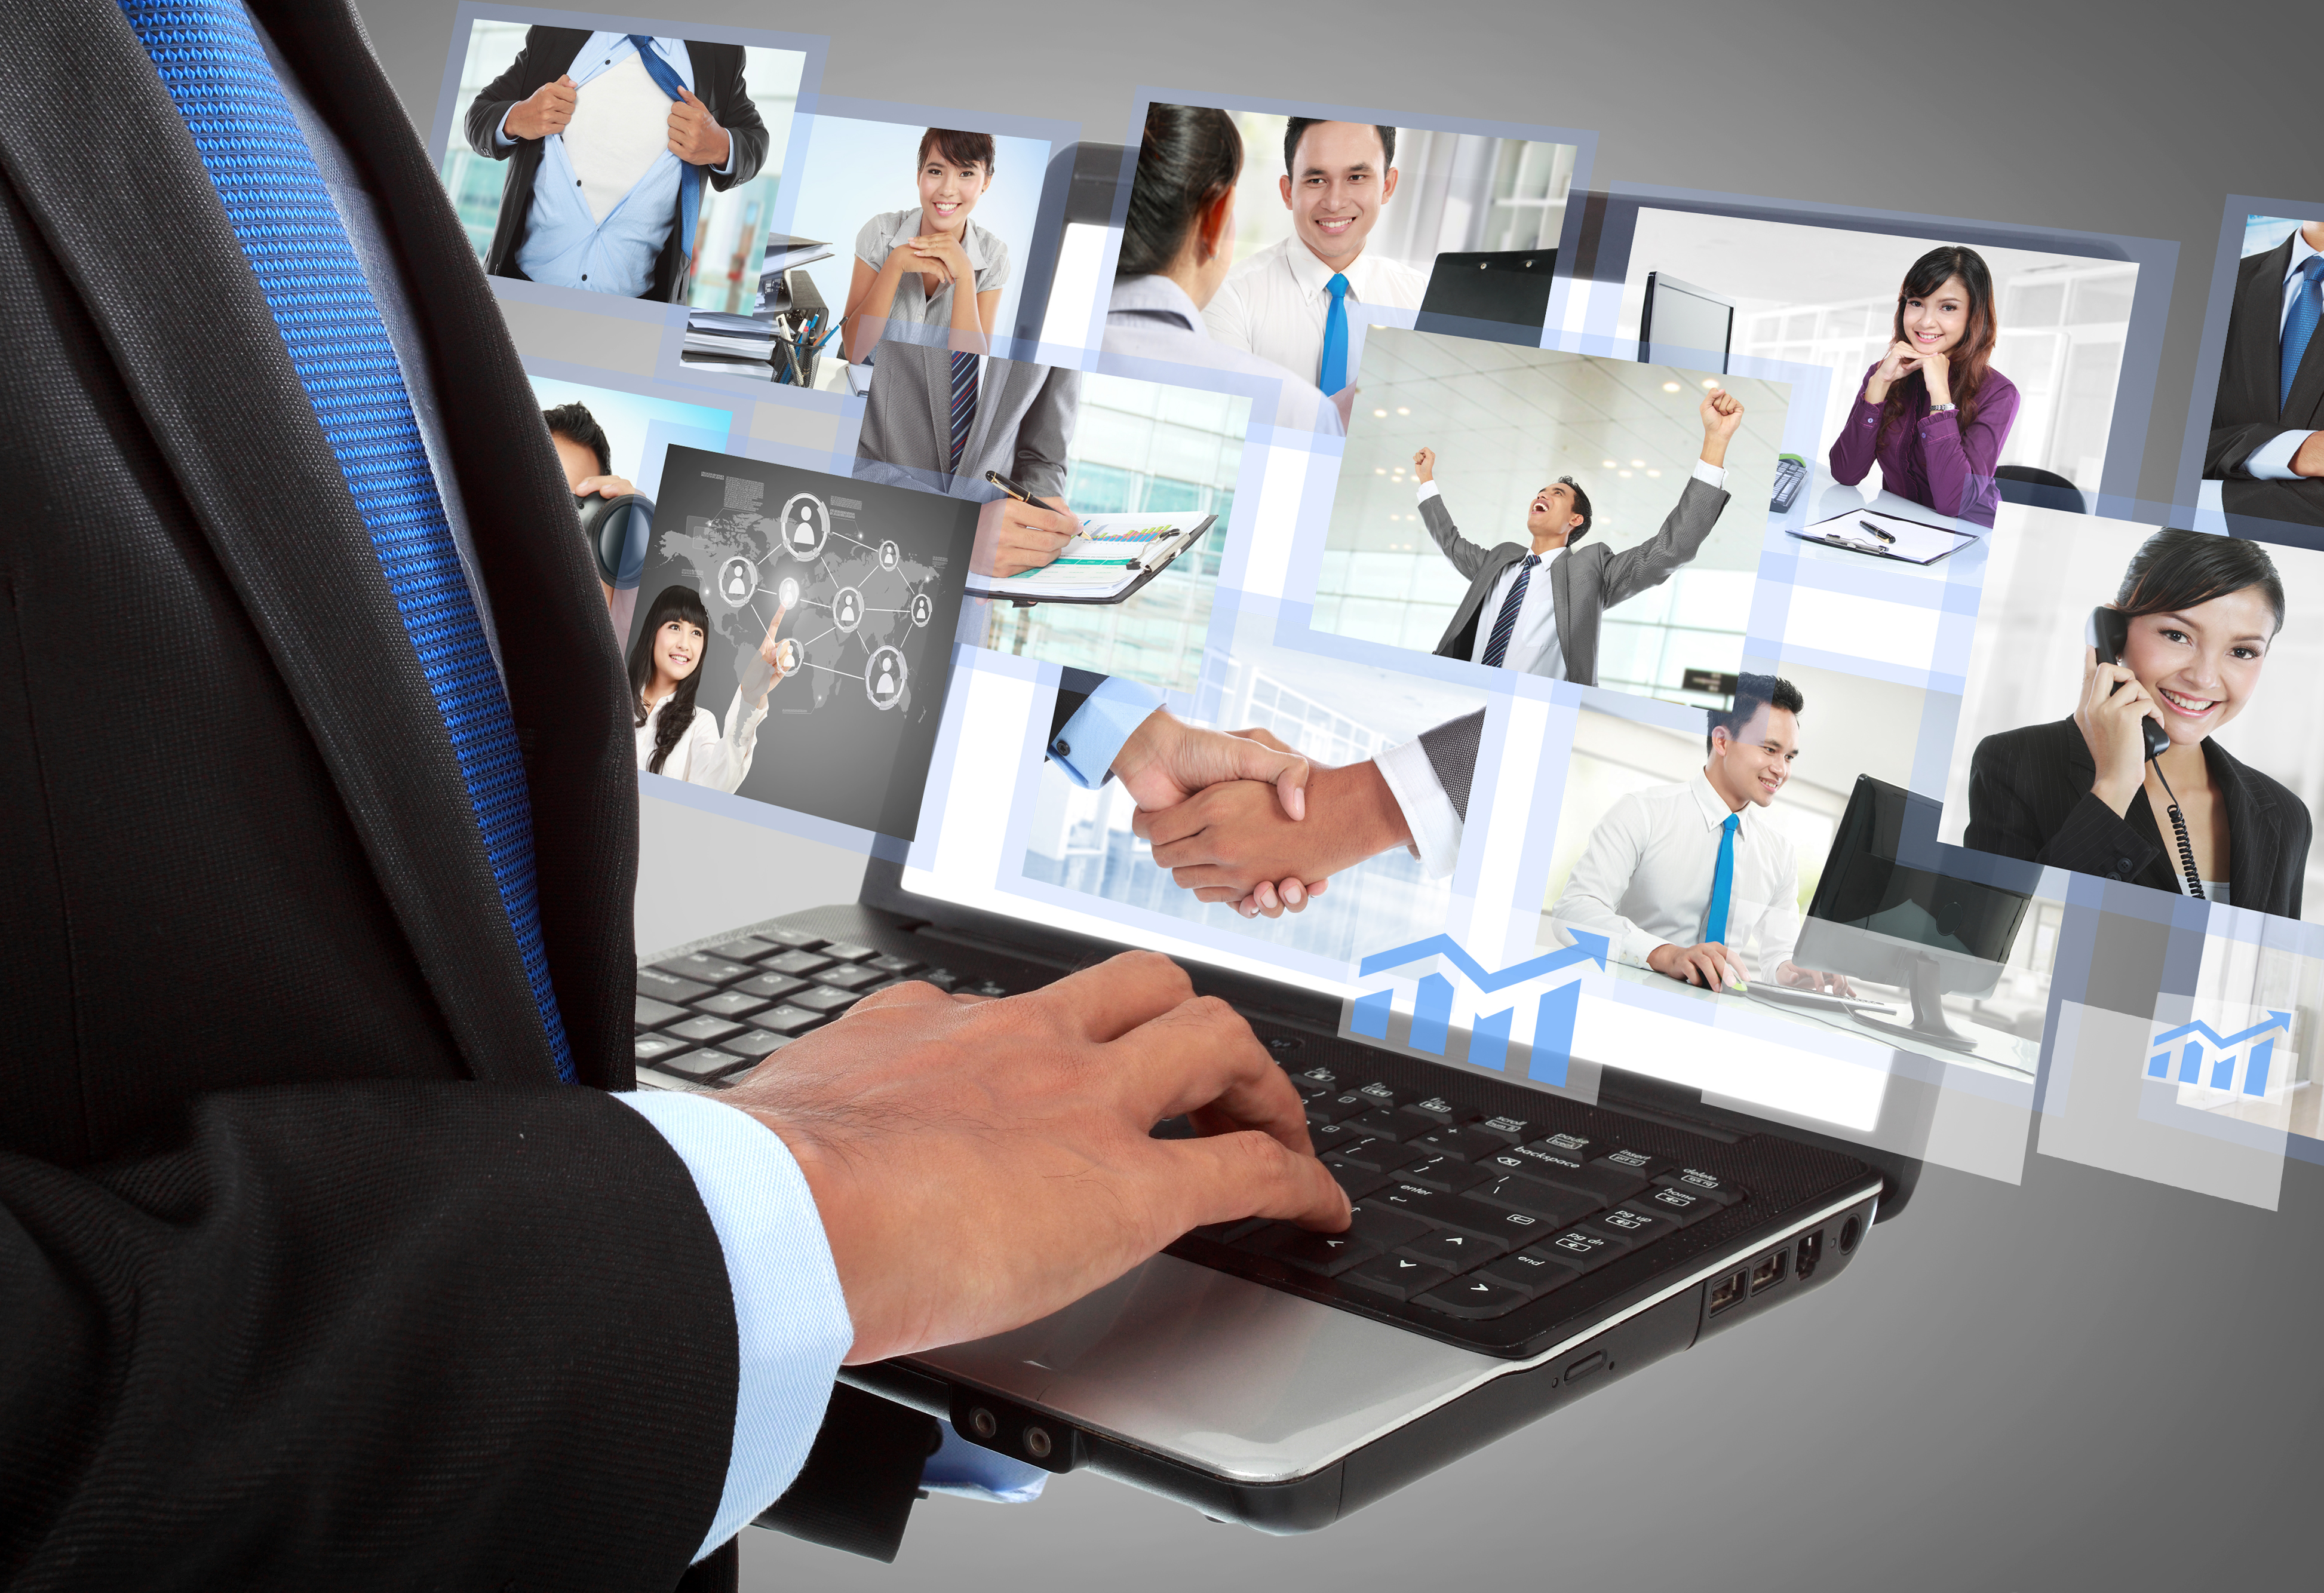 Hosting a Virtual Conference: 3 Top Tips for Your Nonprofit